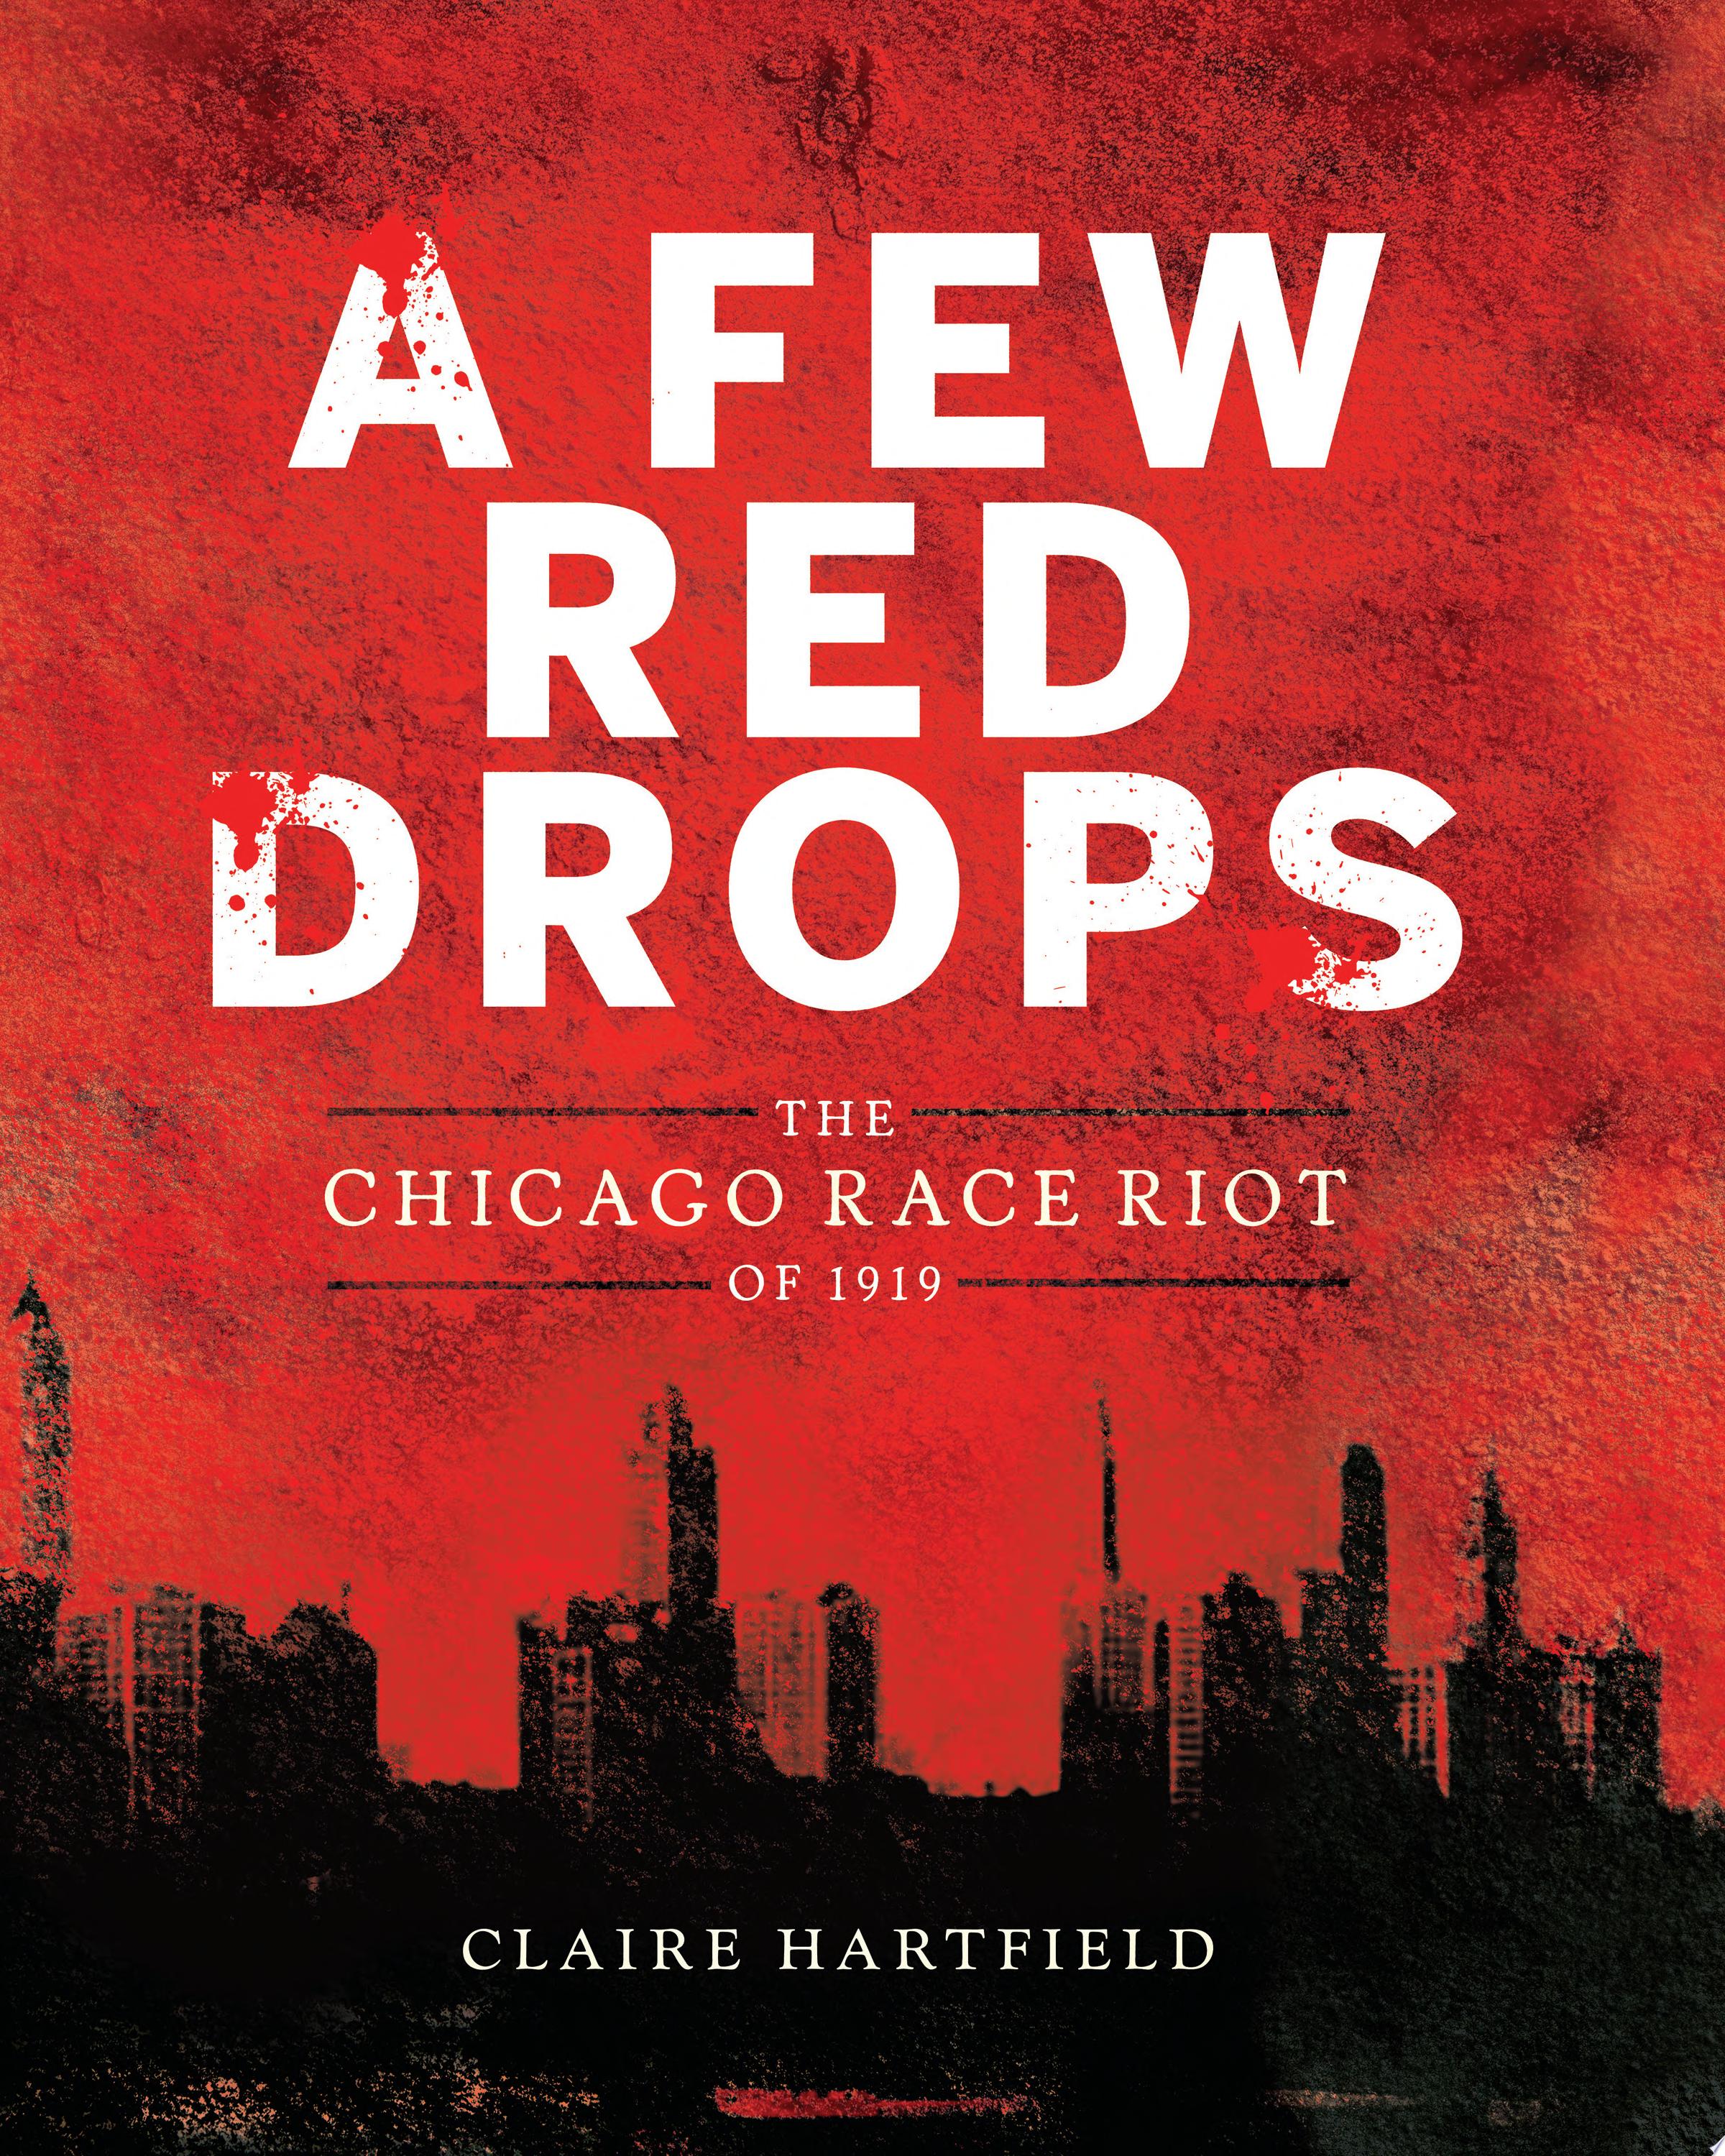 Image for "A Few Red Drops"